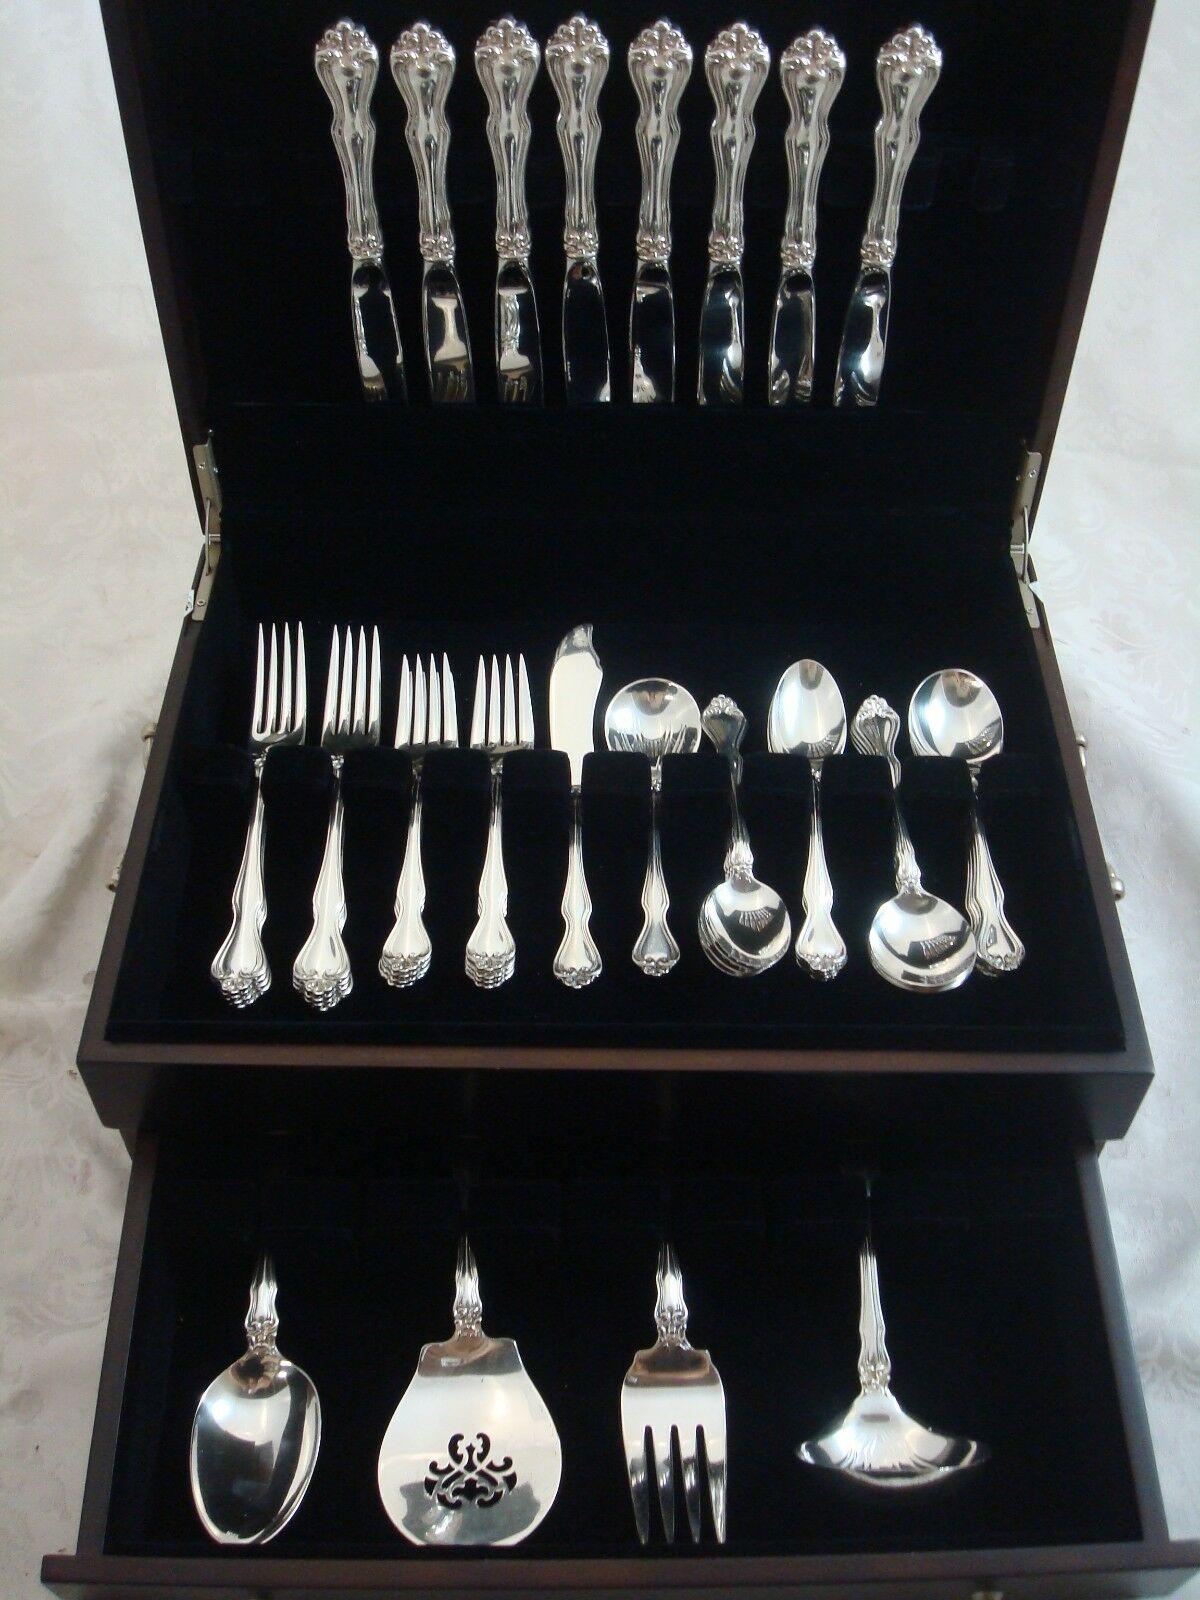 Beautiful George & Martha by Westmorland sterling silver Flatware set - 46 Pieces. This set includes:

8 knives, modern blades, 9